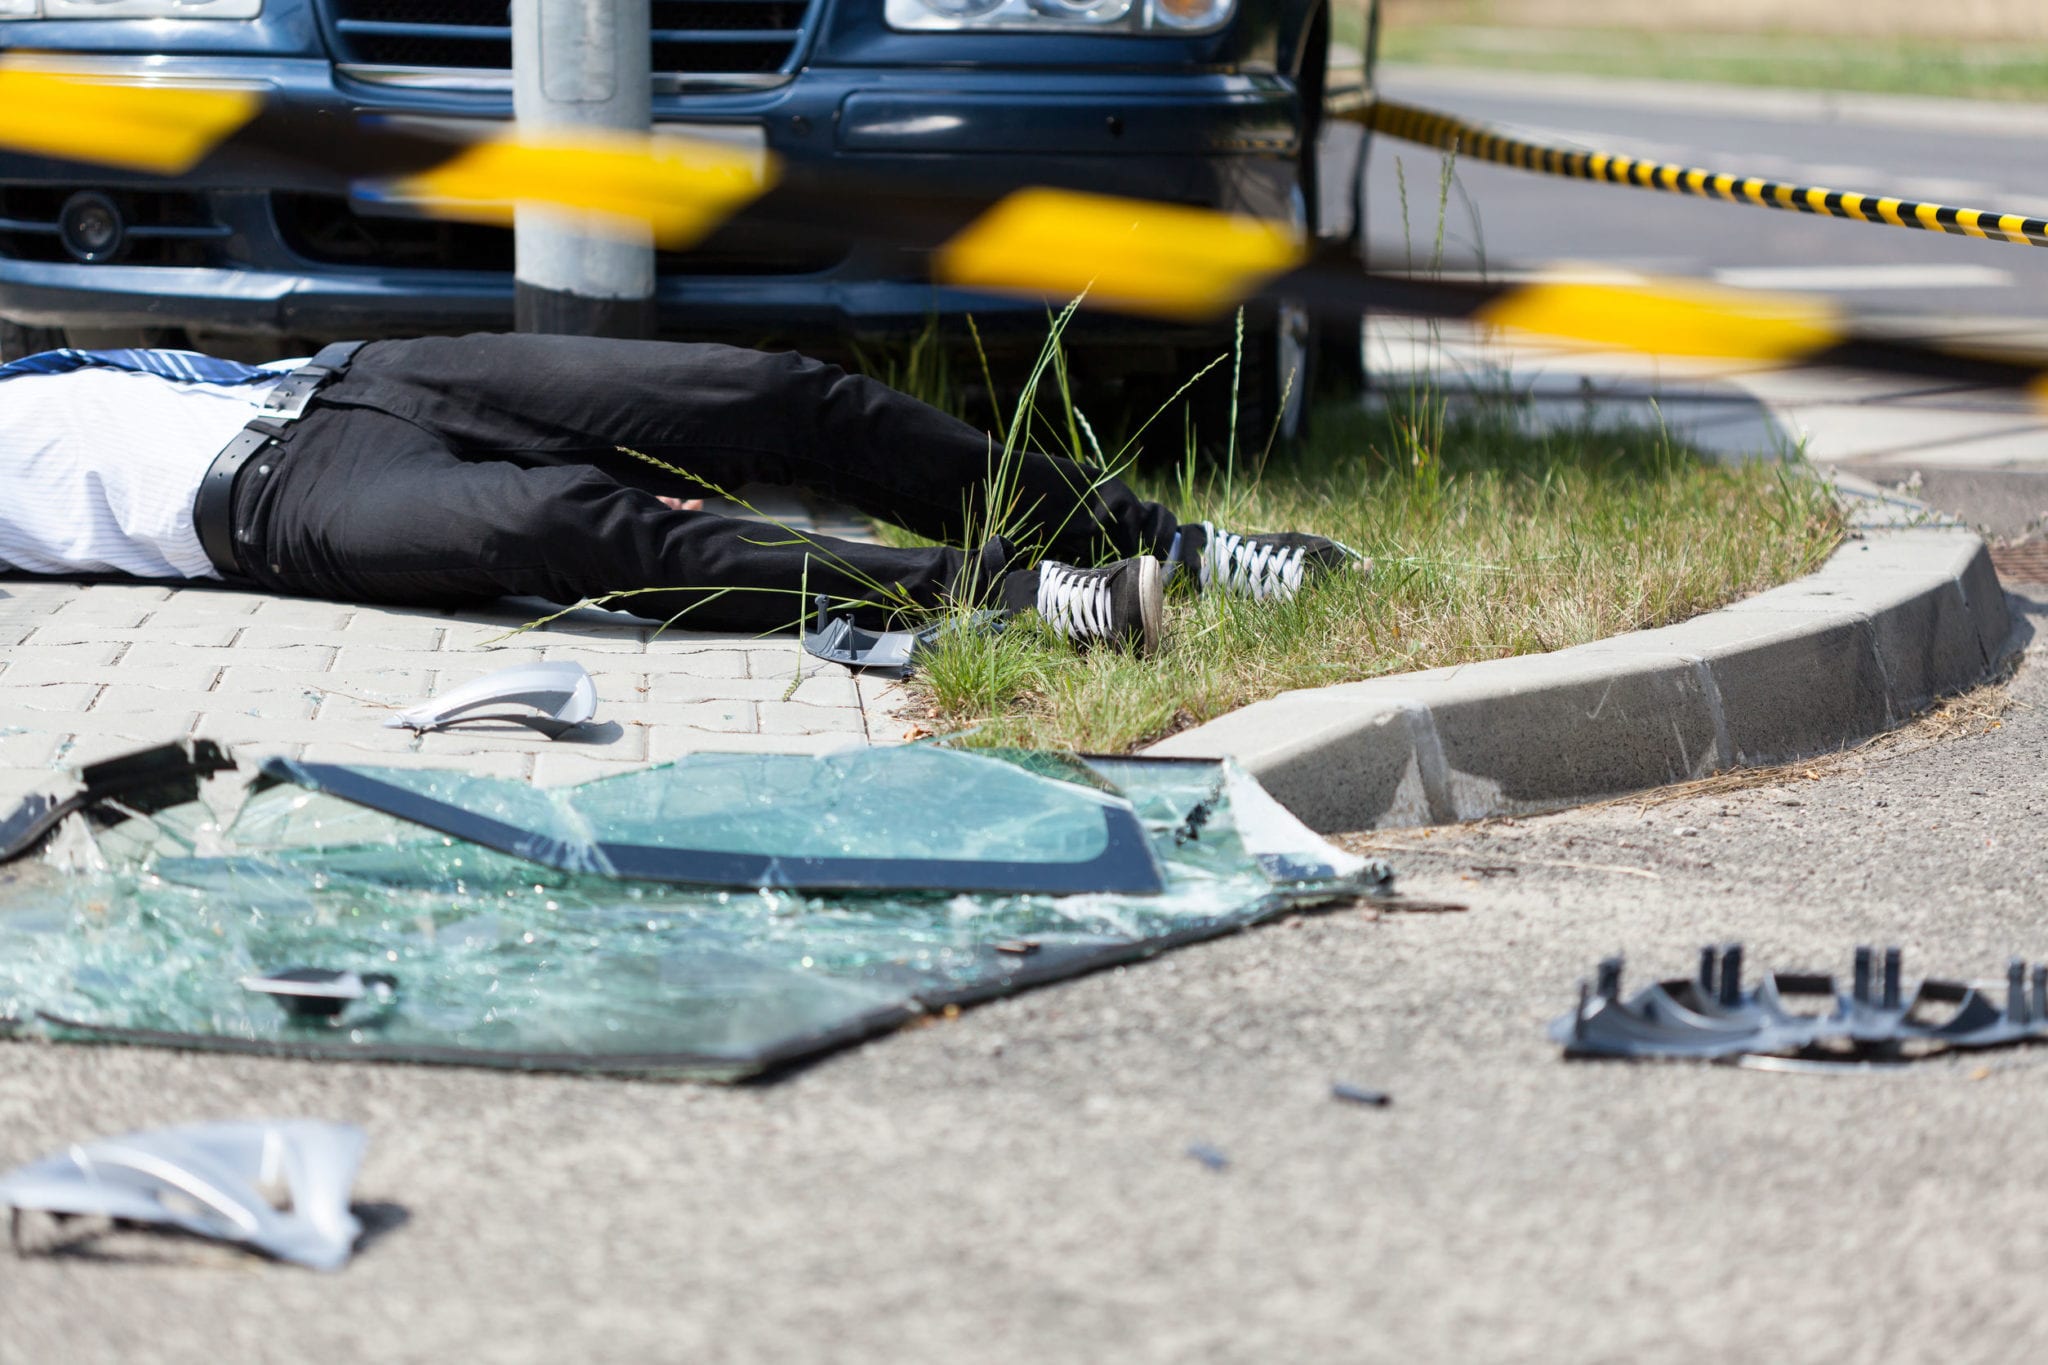 Vehicular Manslaughter in Texas: What You Should Know